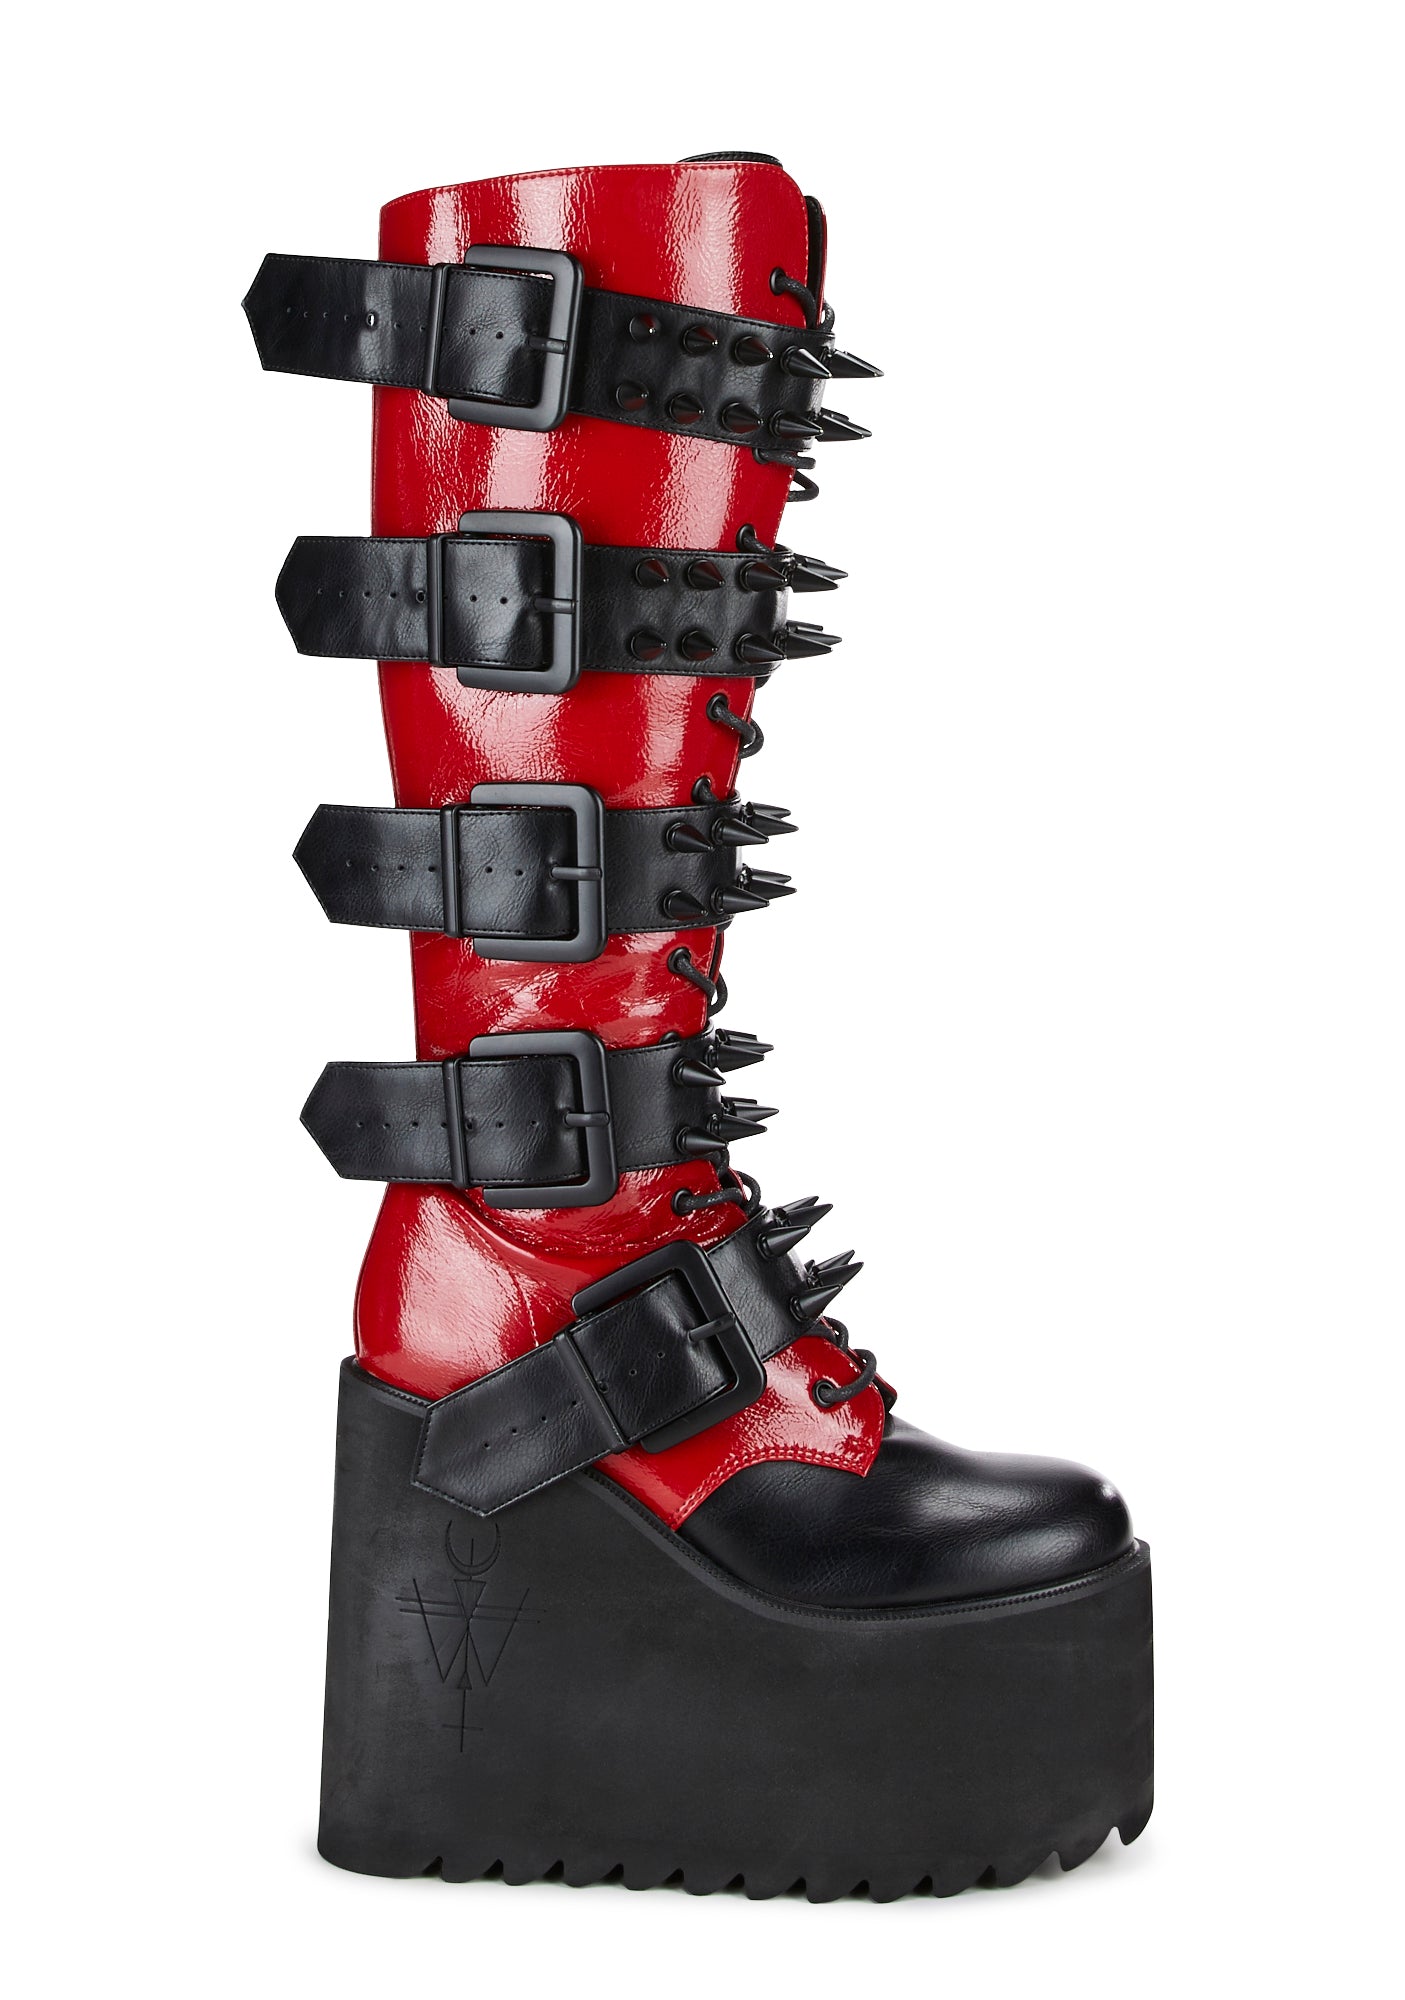 Widow Matte Vegan Leather Spiked Boots - Black/Red